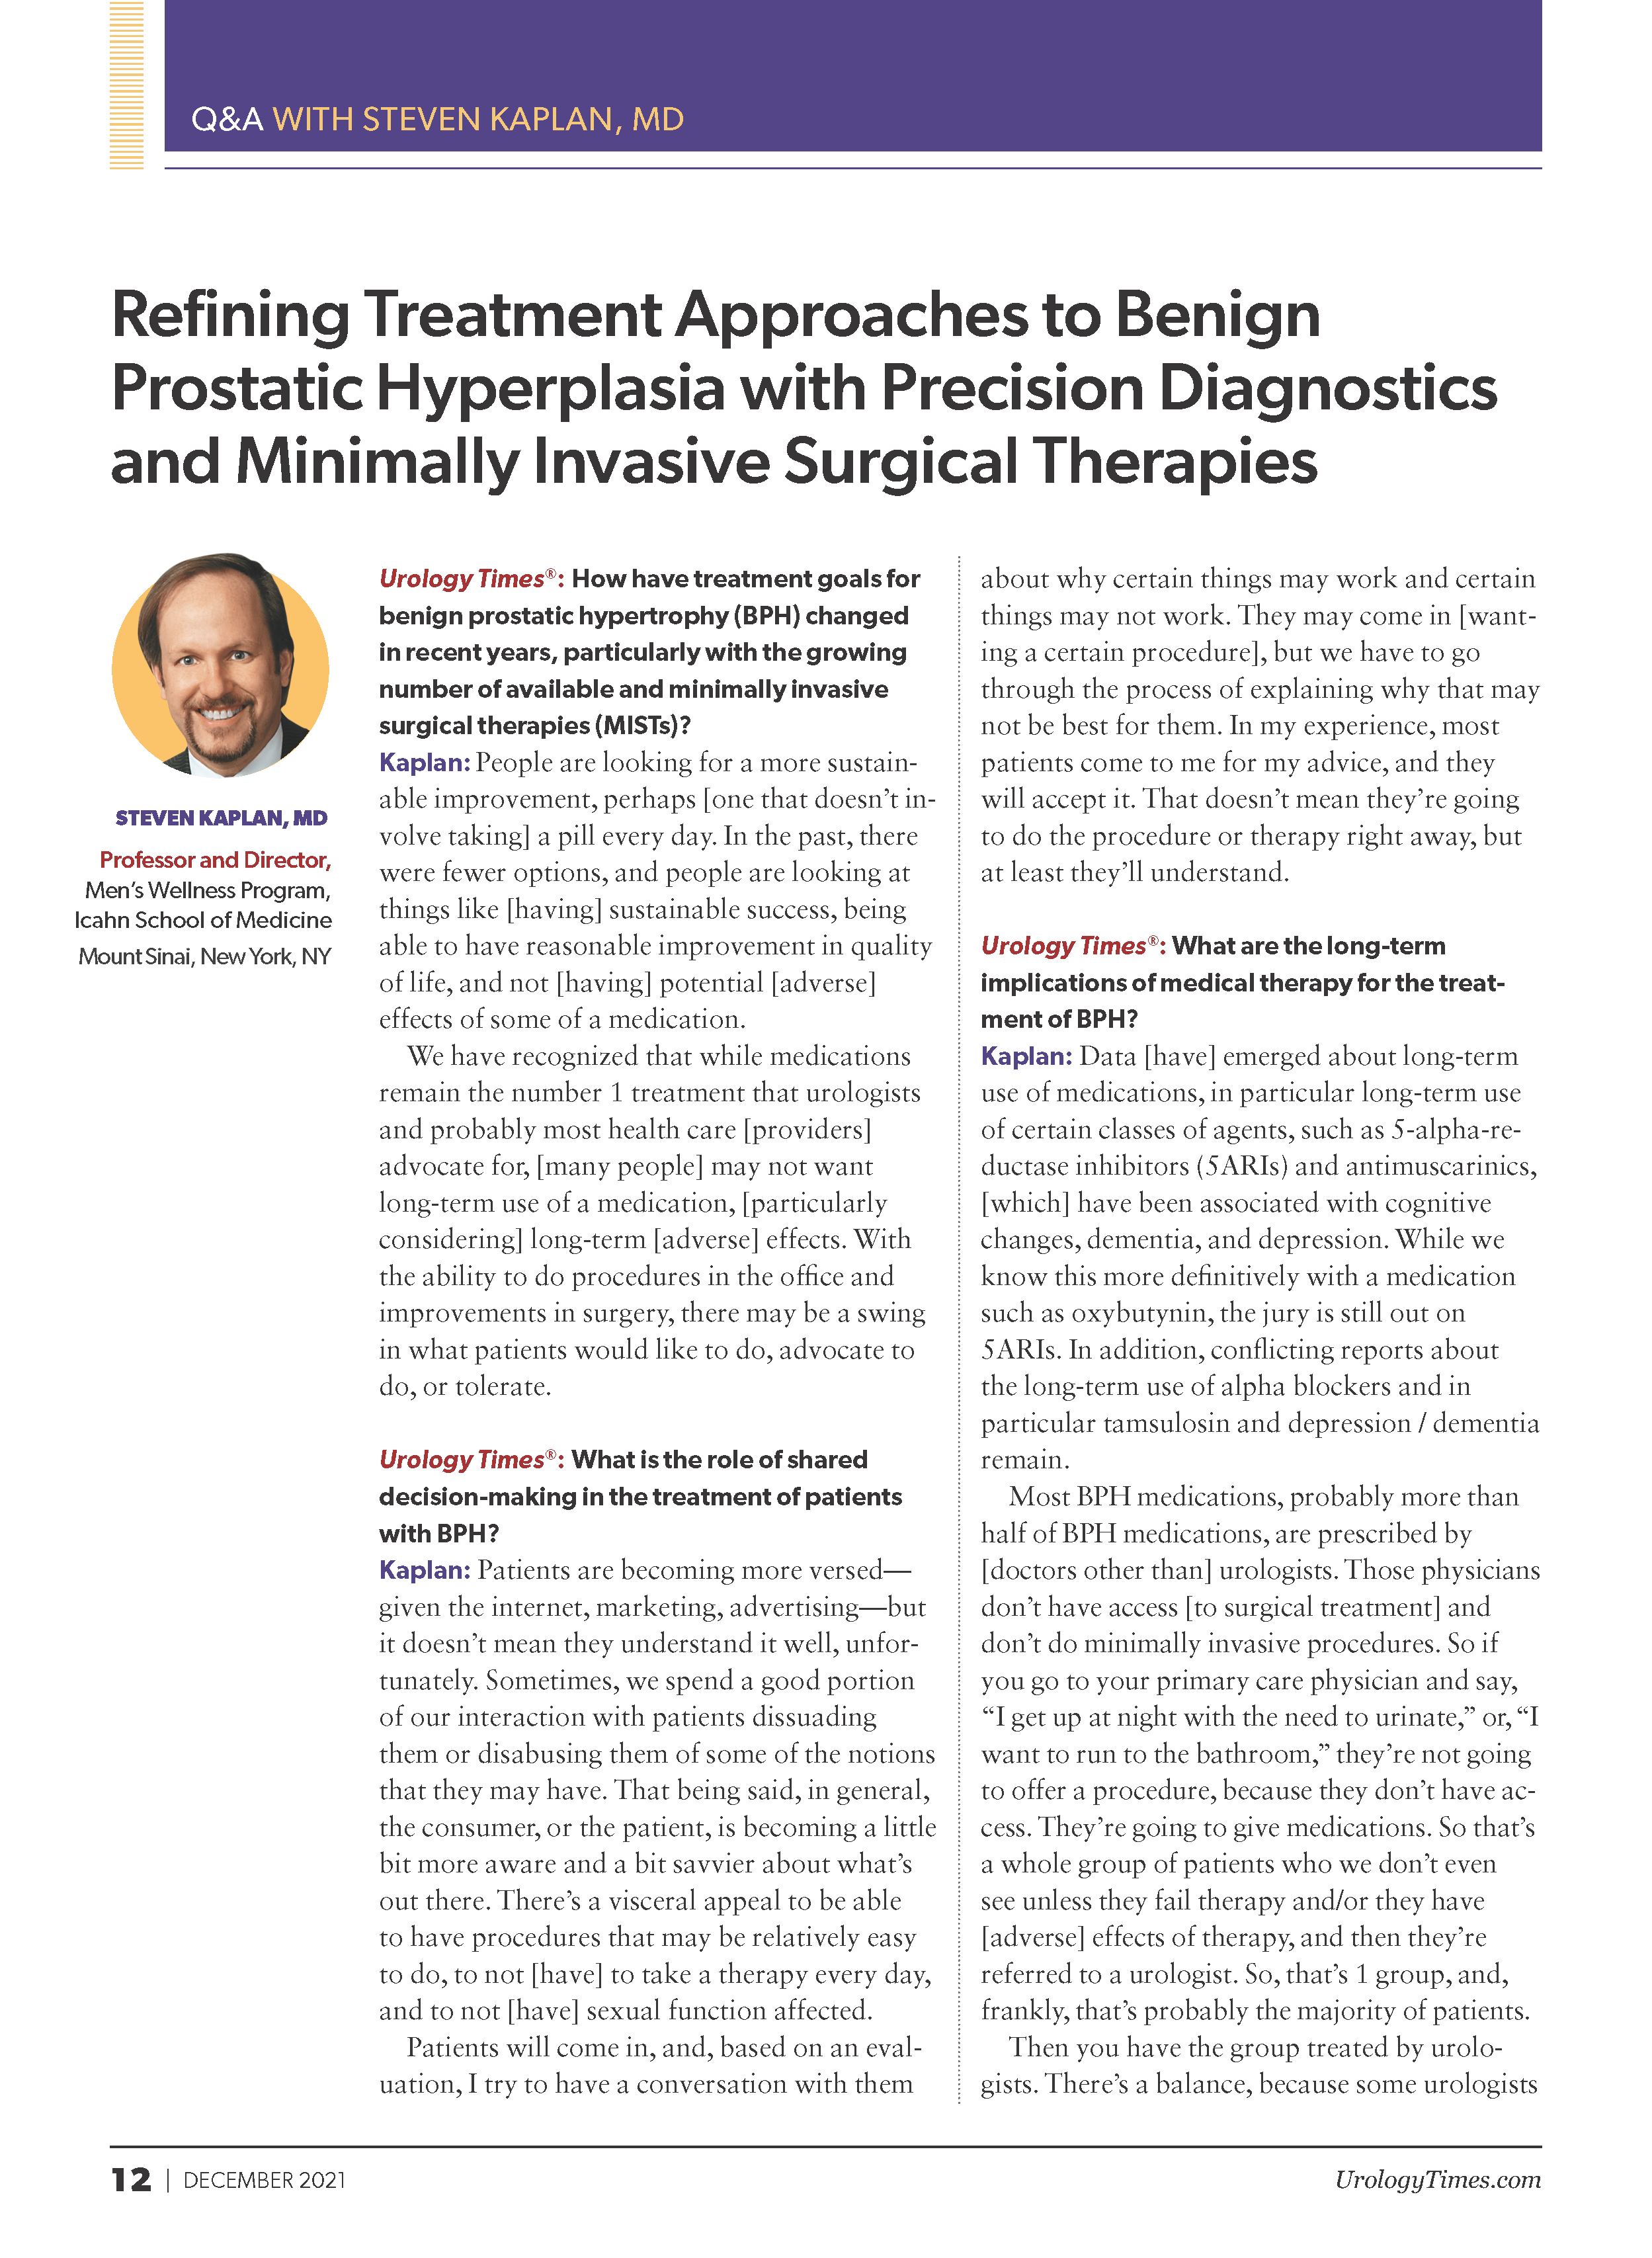 Refining Treatment Approaches to Benign Prostatic Hyperplasia with Precision Diagnostics and Minimally Invasive Surgical Therapies